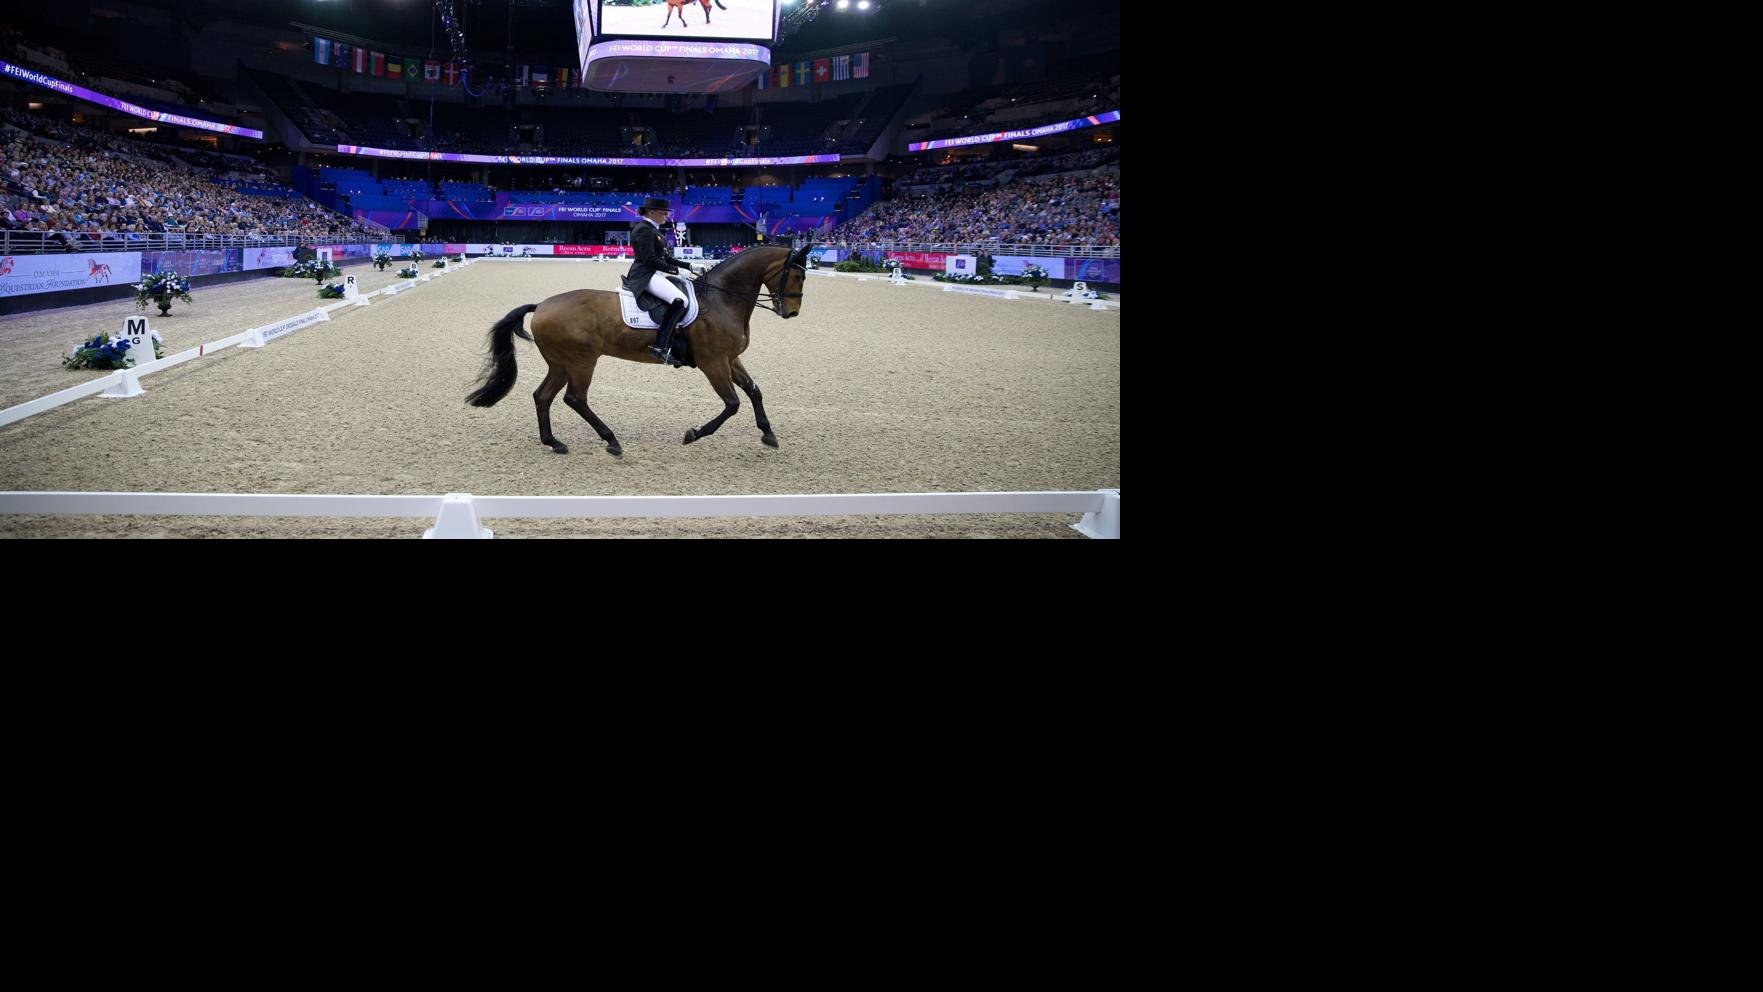 FEI Jumping and Dressage World Cup Finals set to return to Omaha in